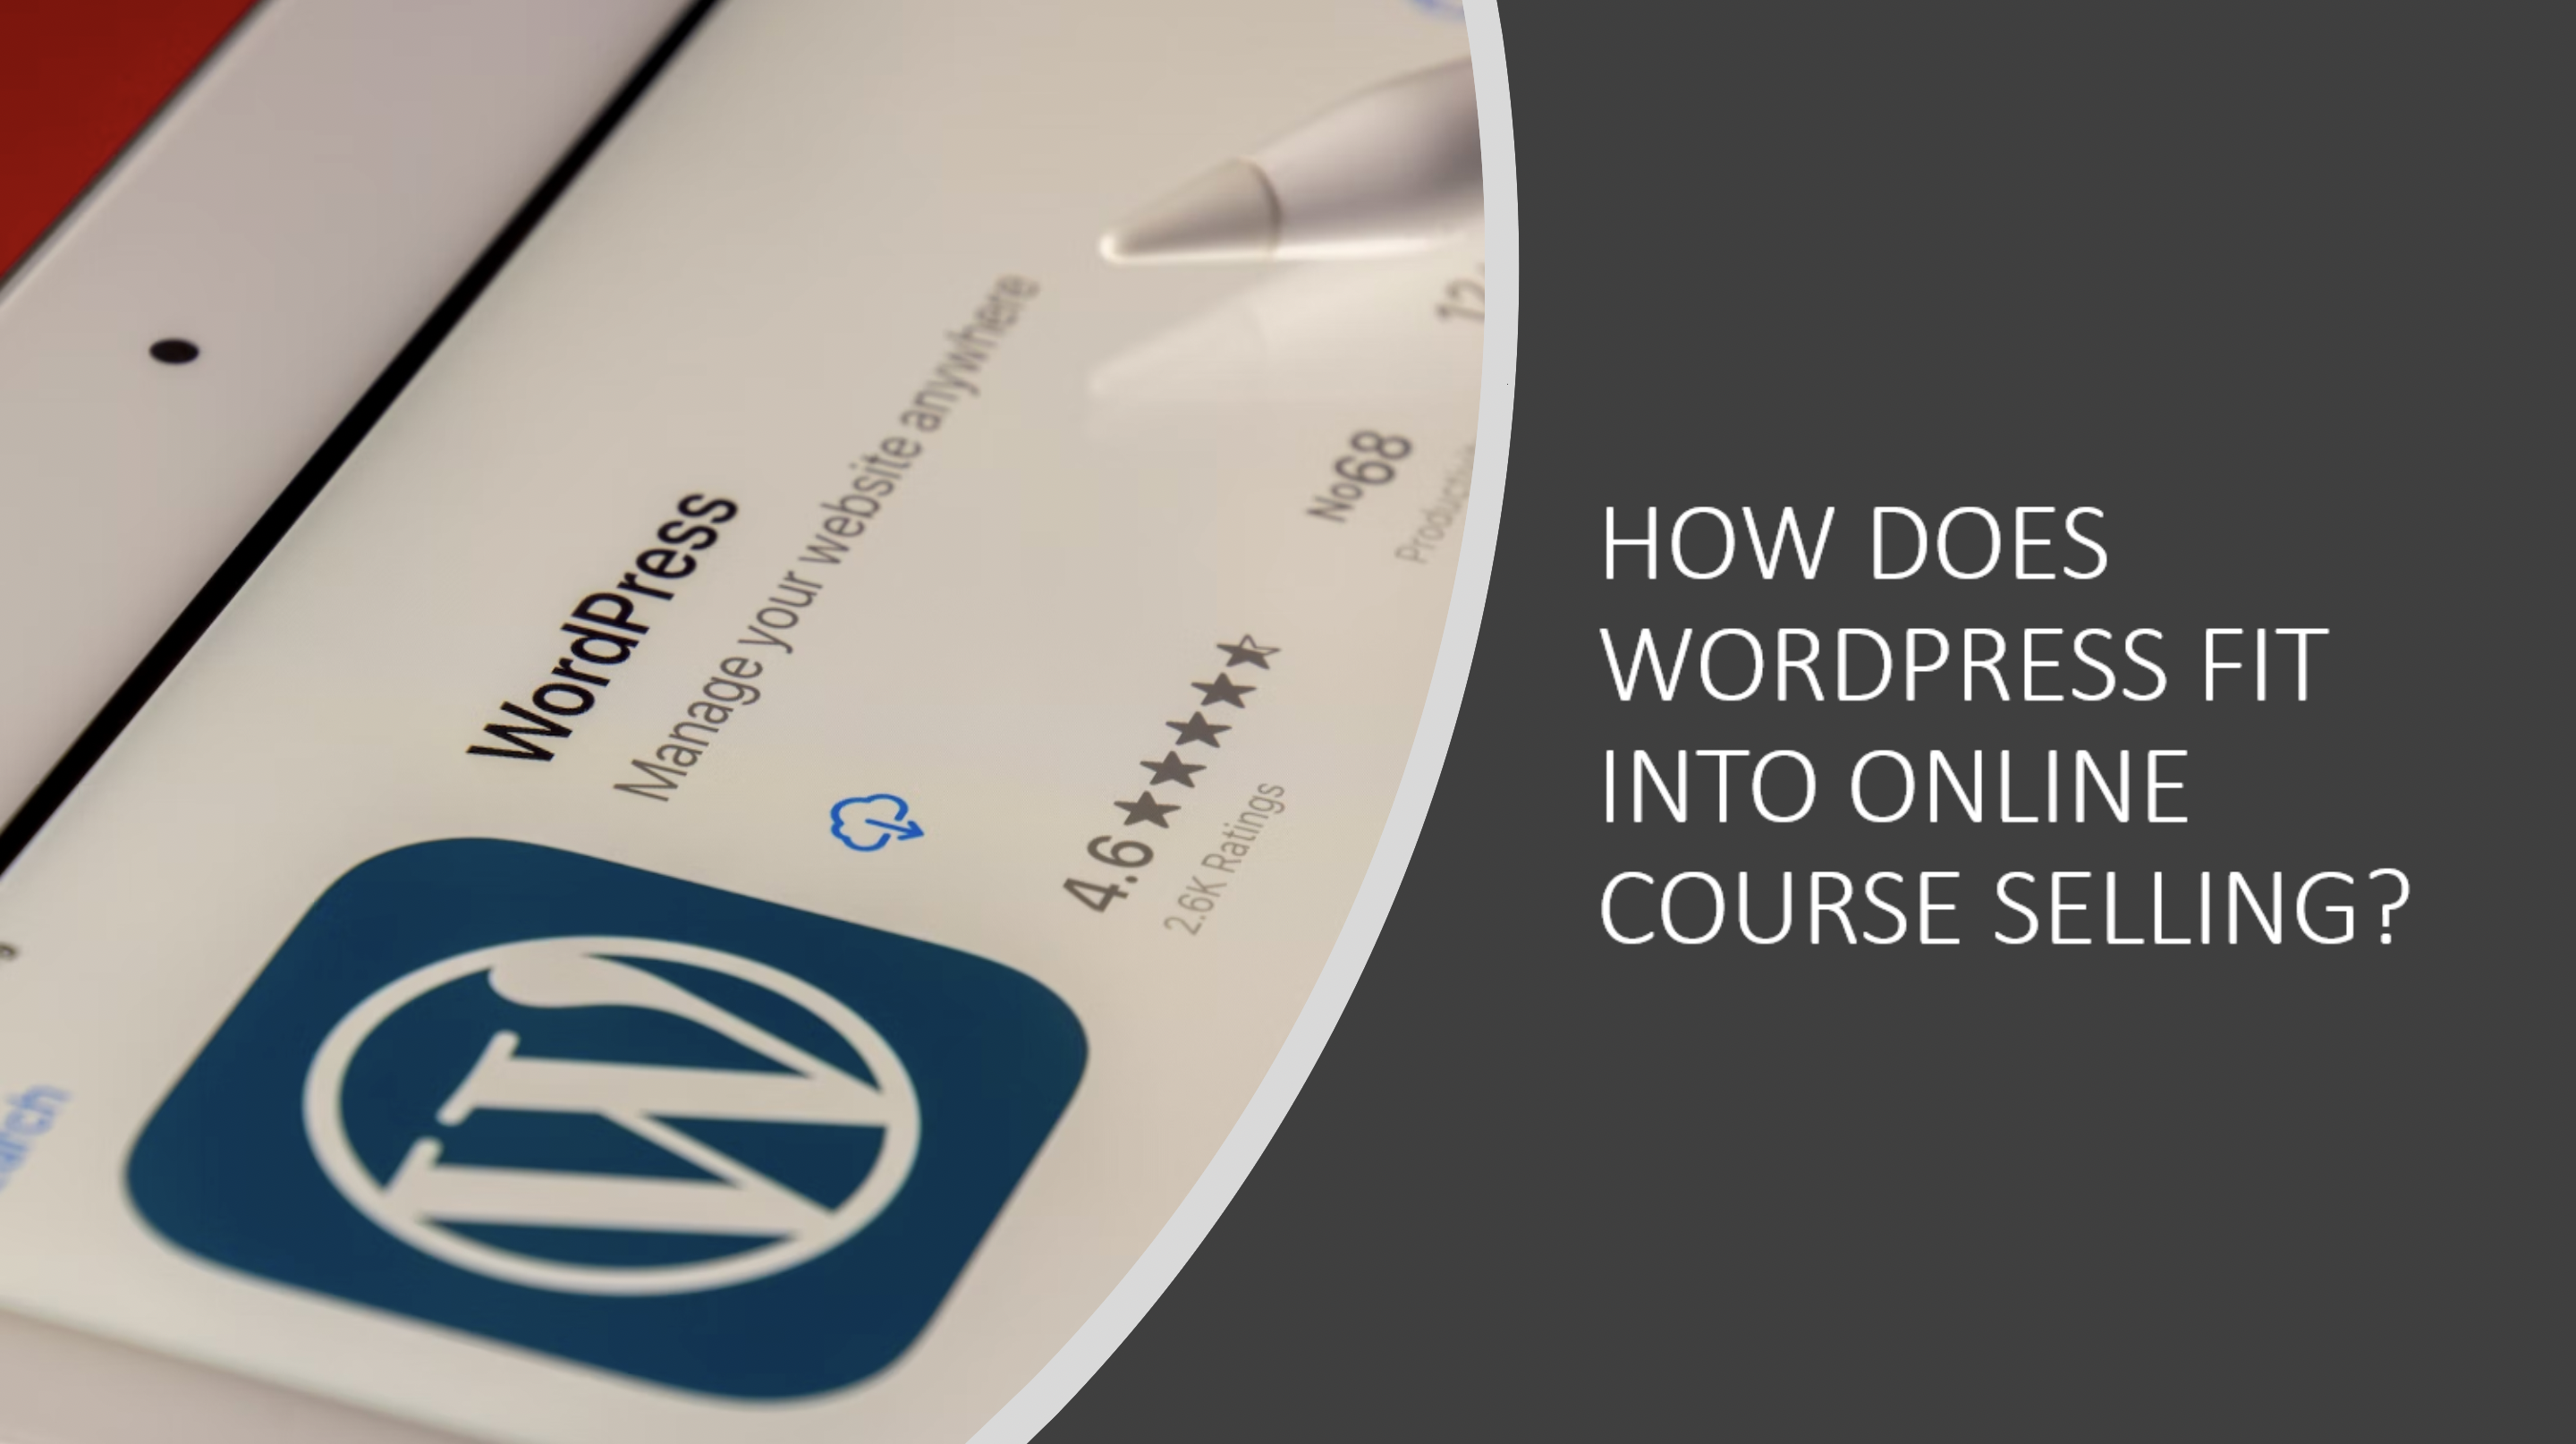 How Does WordPress Fit Into Online Course Selling?